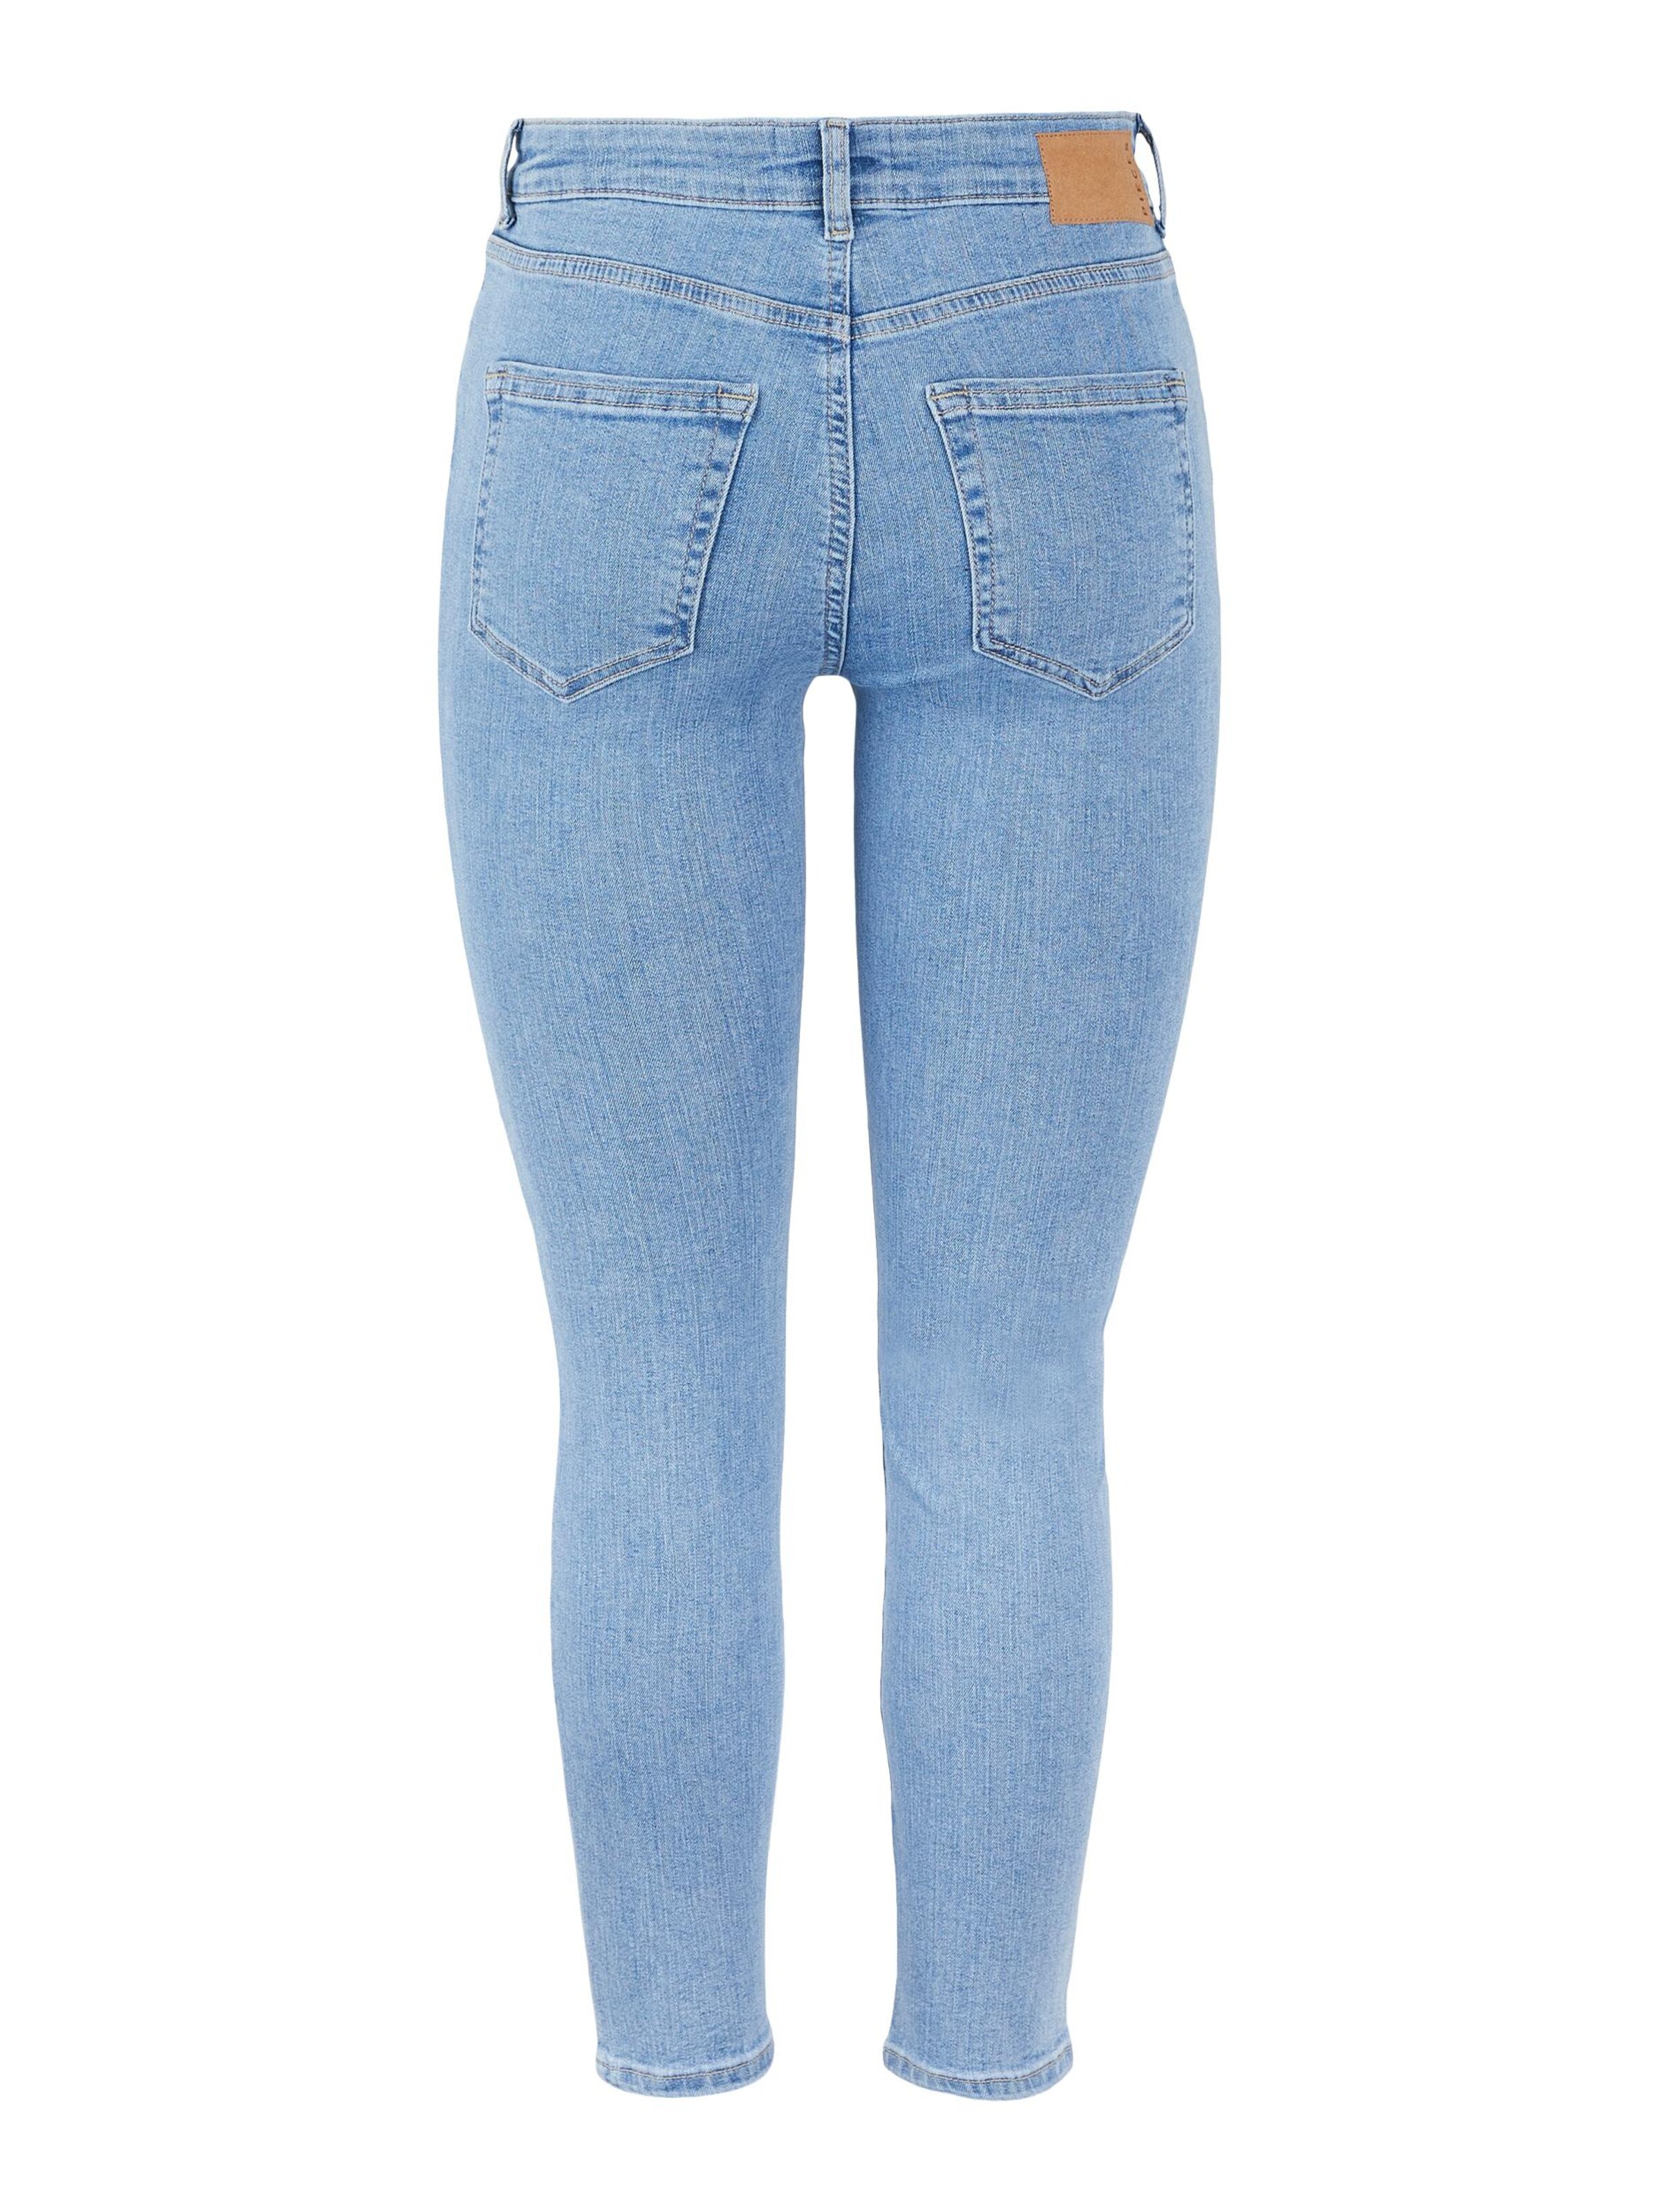 PIECES Jeans Delly in Hellblau 